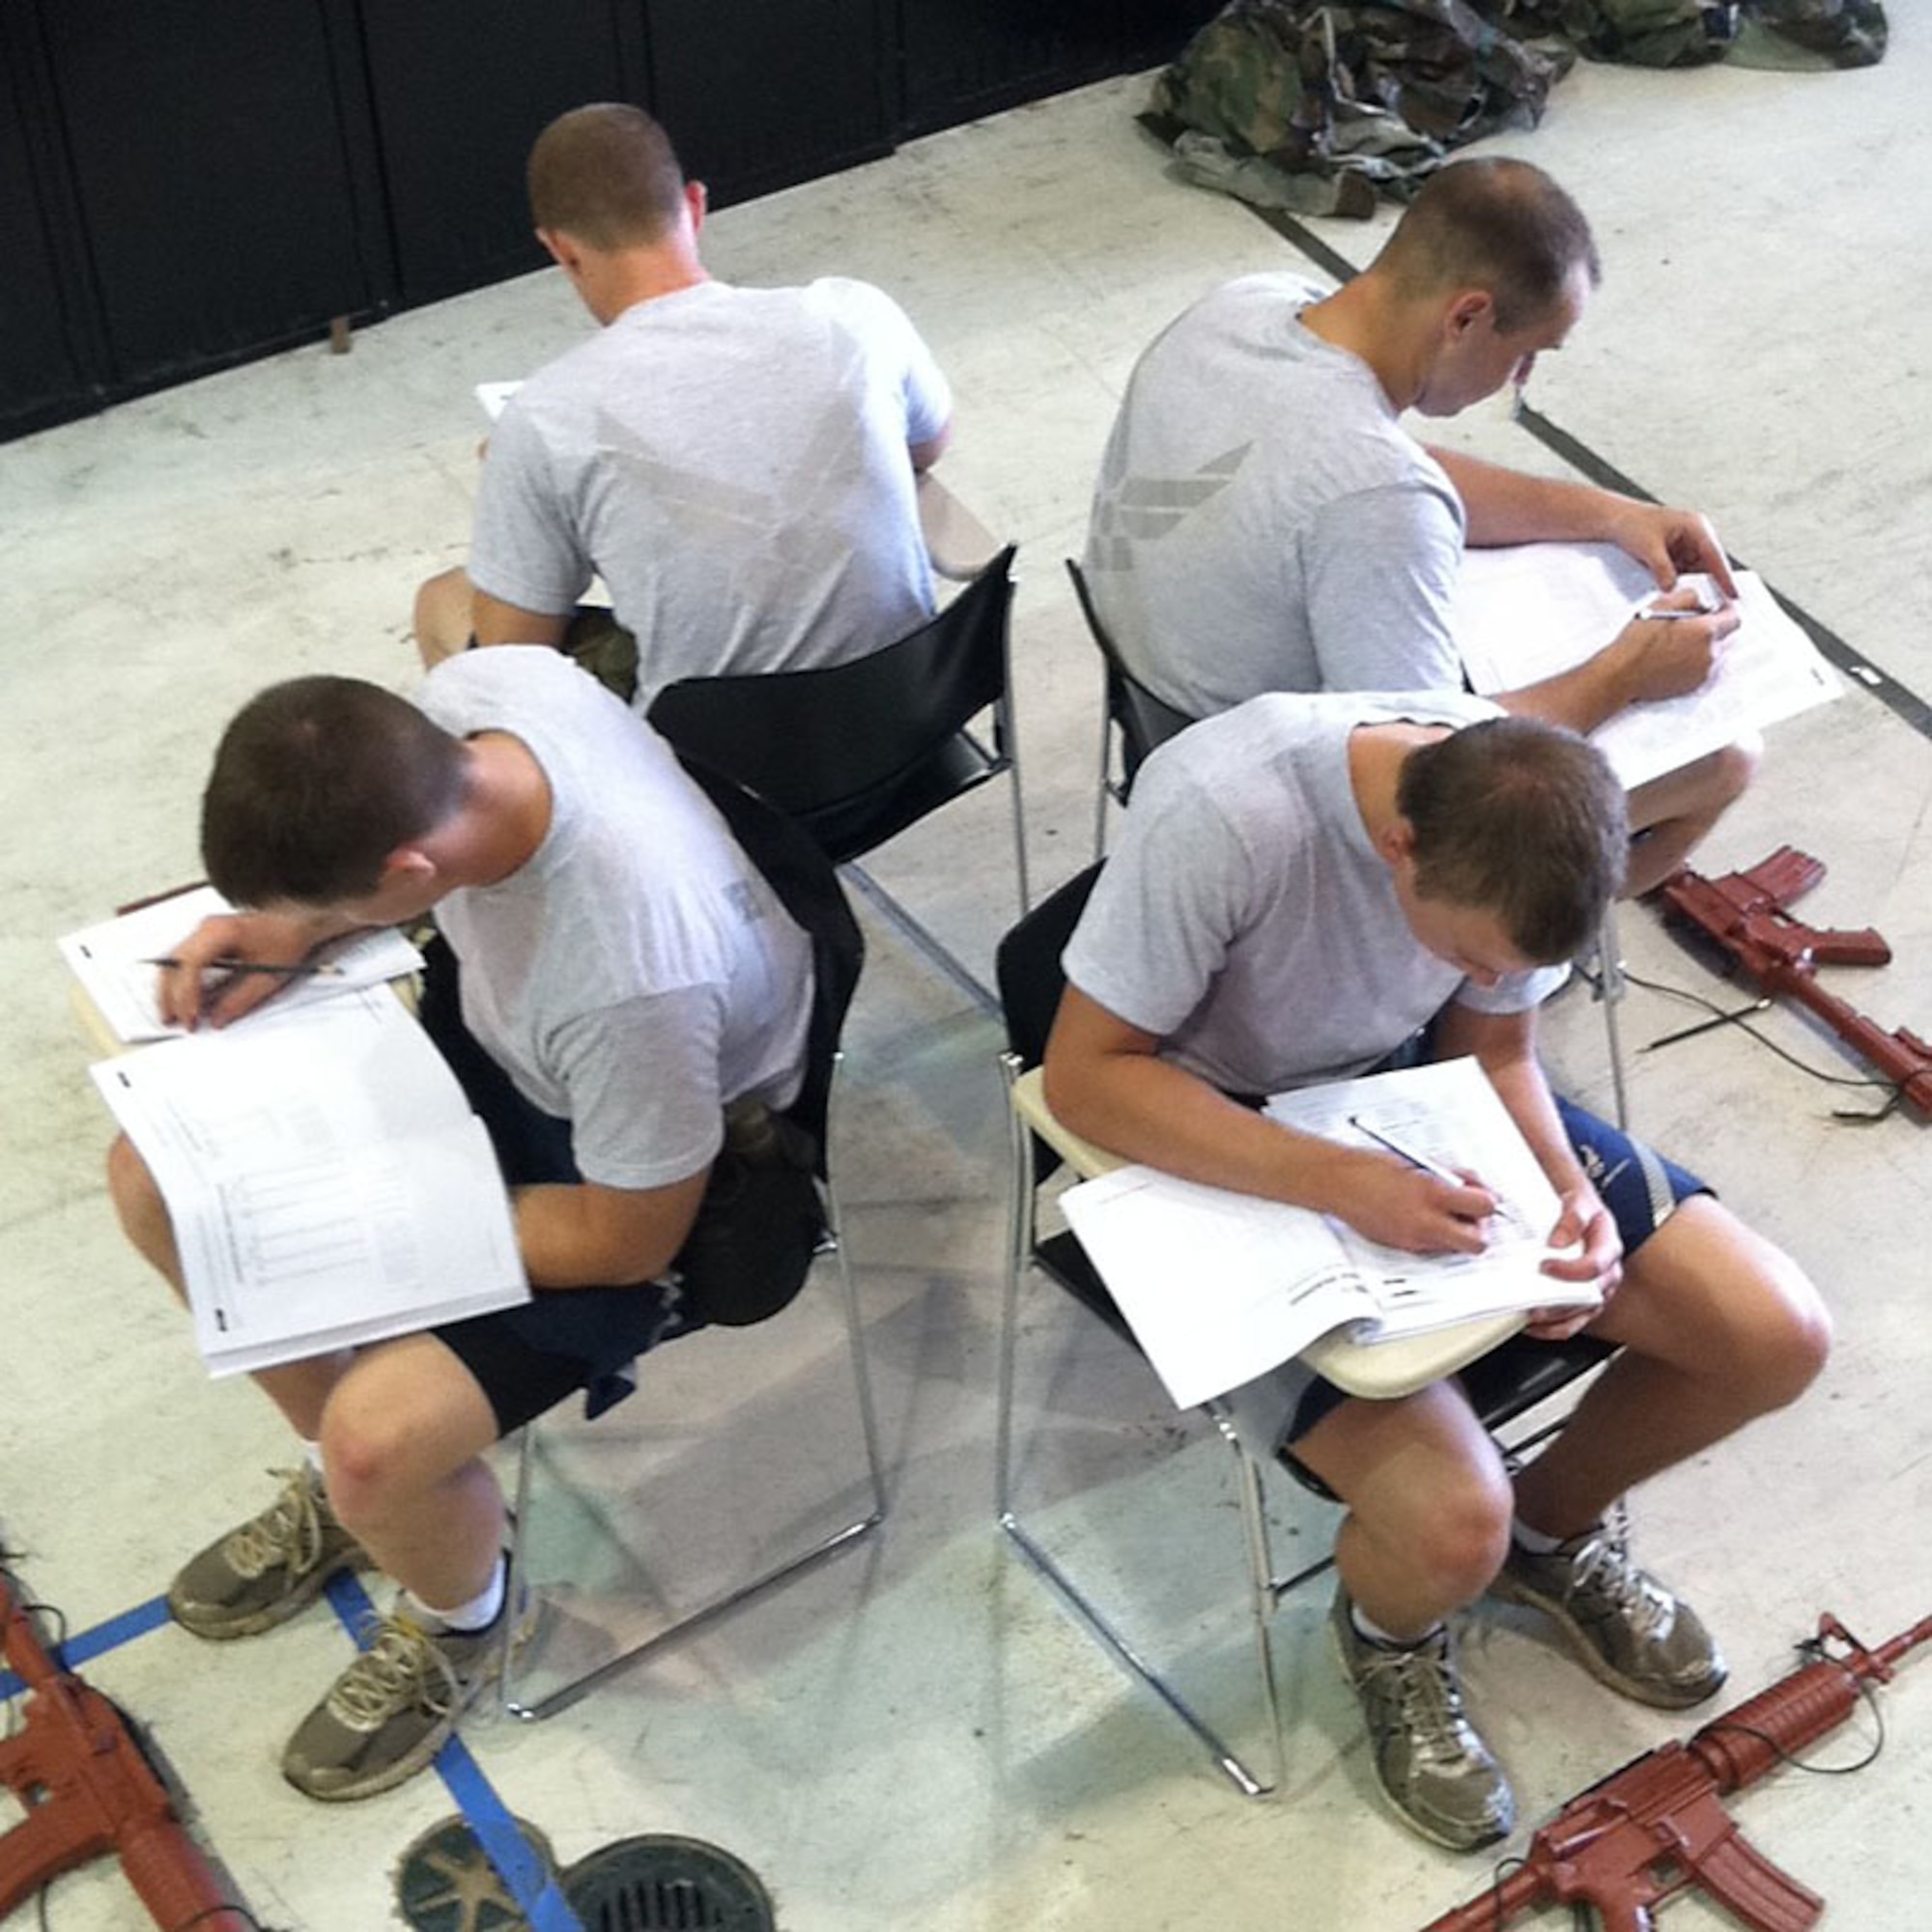 TACP Candidates complete an arithmetic reasoning test in between physical training events.  Photo by SSgt Eason, ASOS